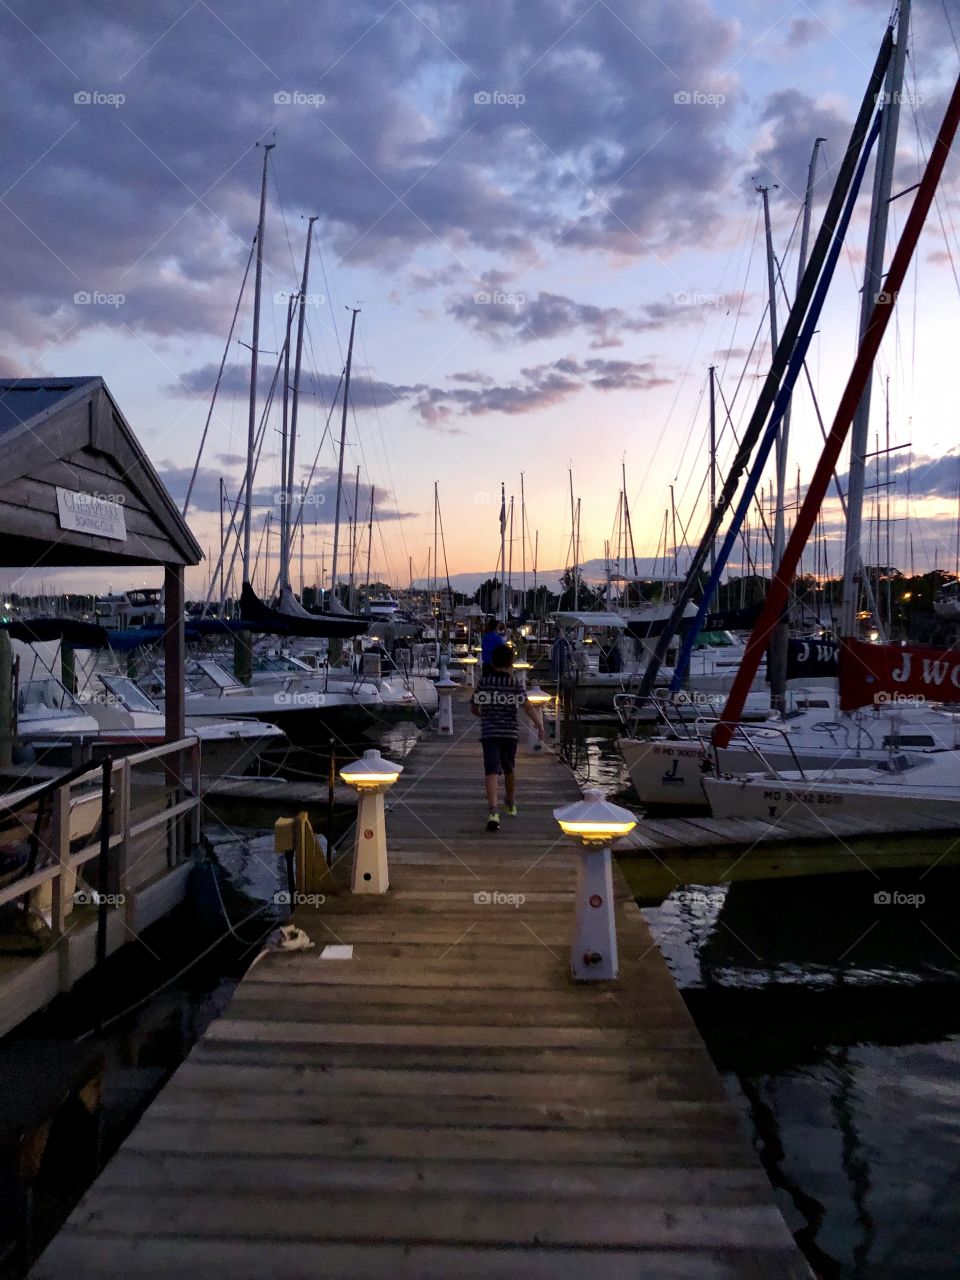 Sunset at the marina in Annapolis MD